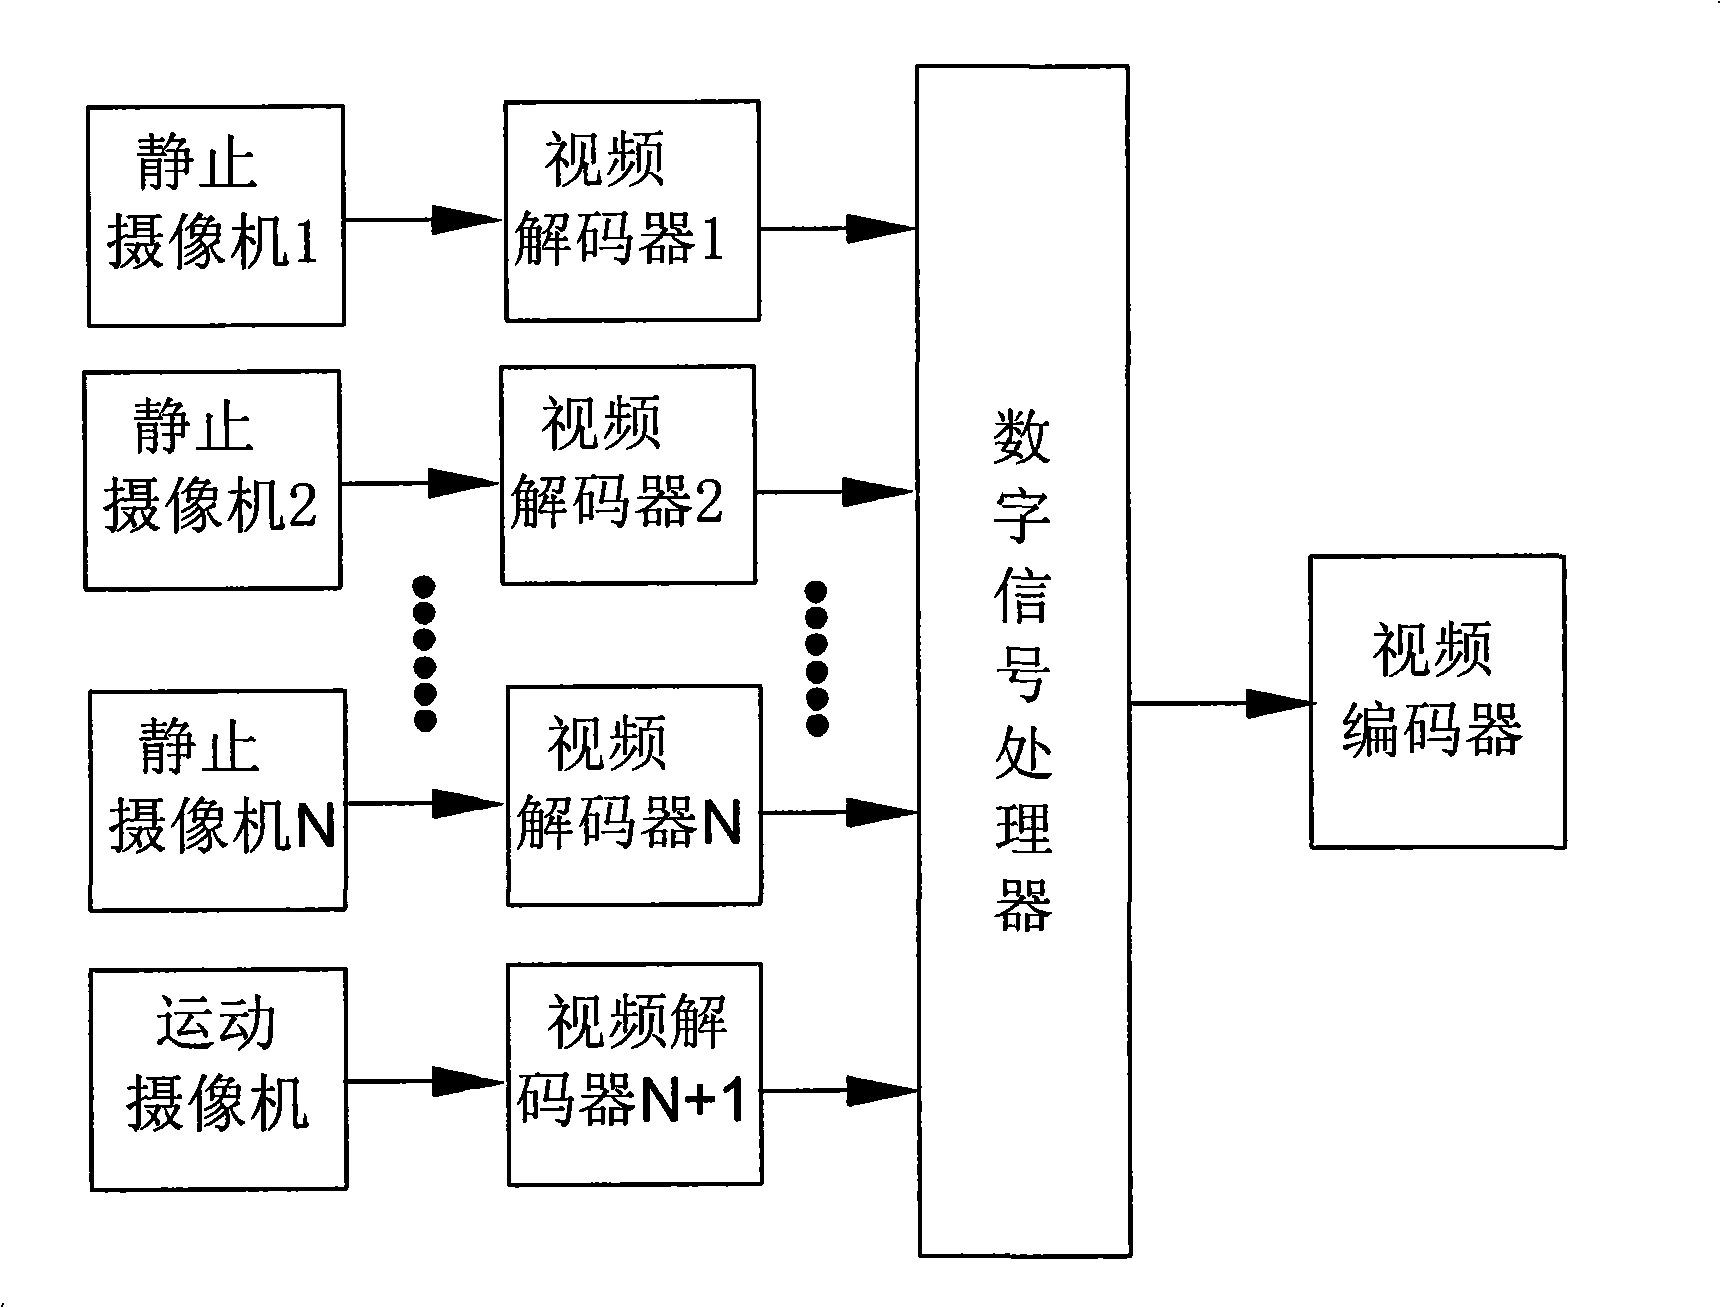 Full-view cooperative video monitoring apparatus and full-view image splicing method